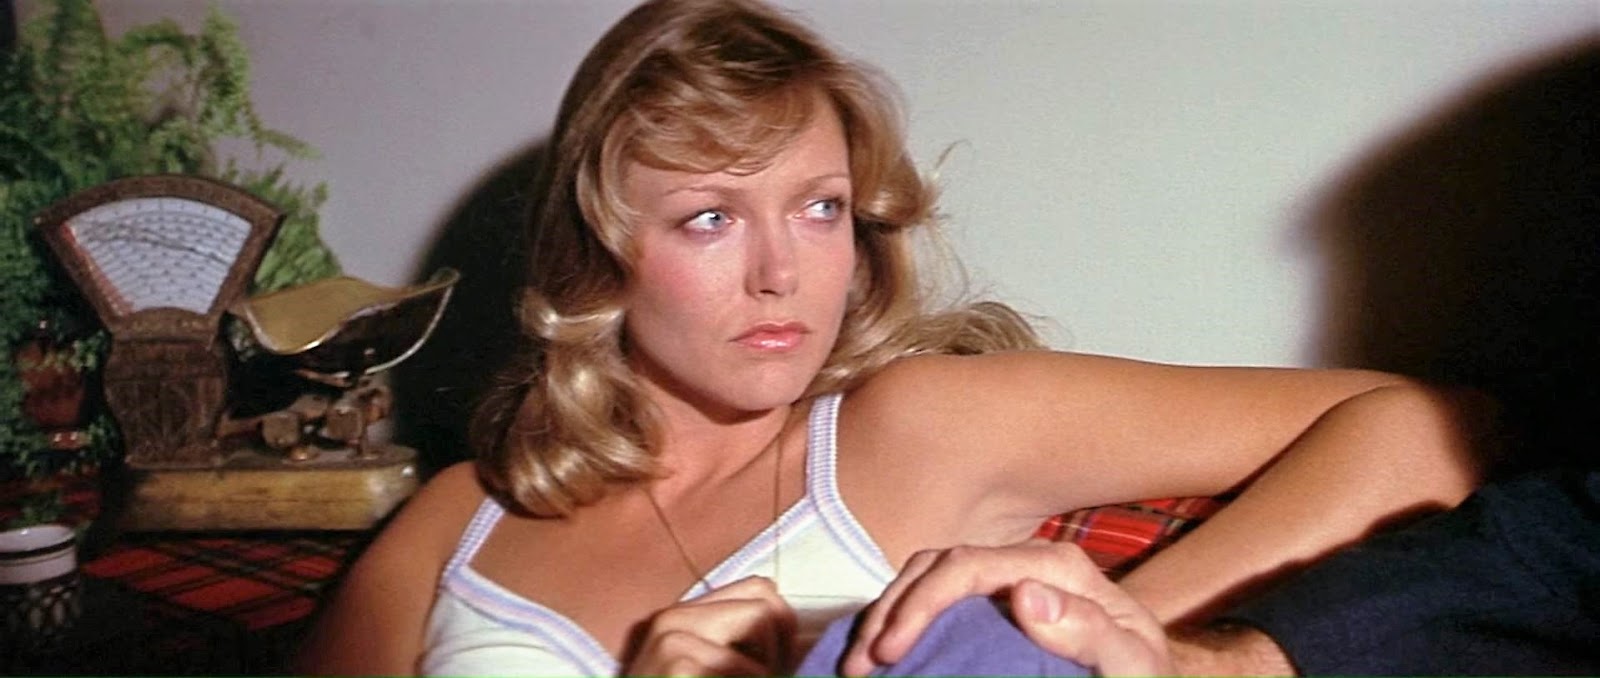 Susan Blakely as Patty Simmons "The Wife" .